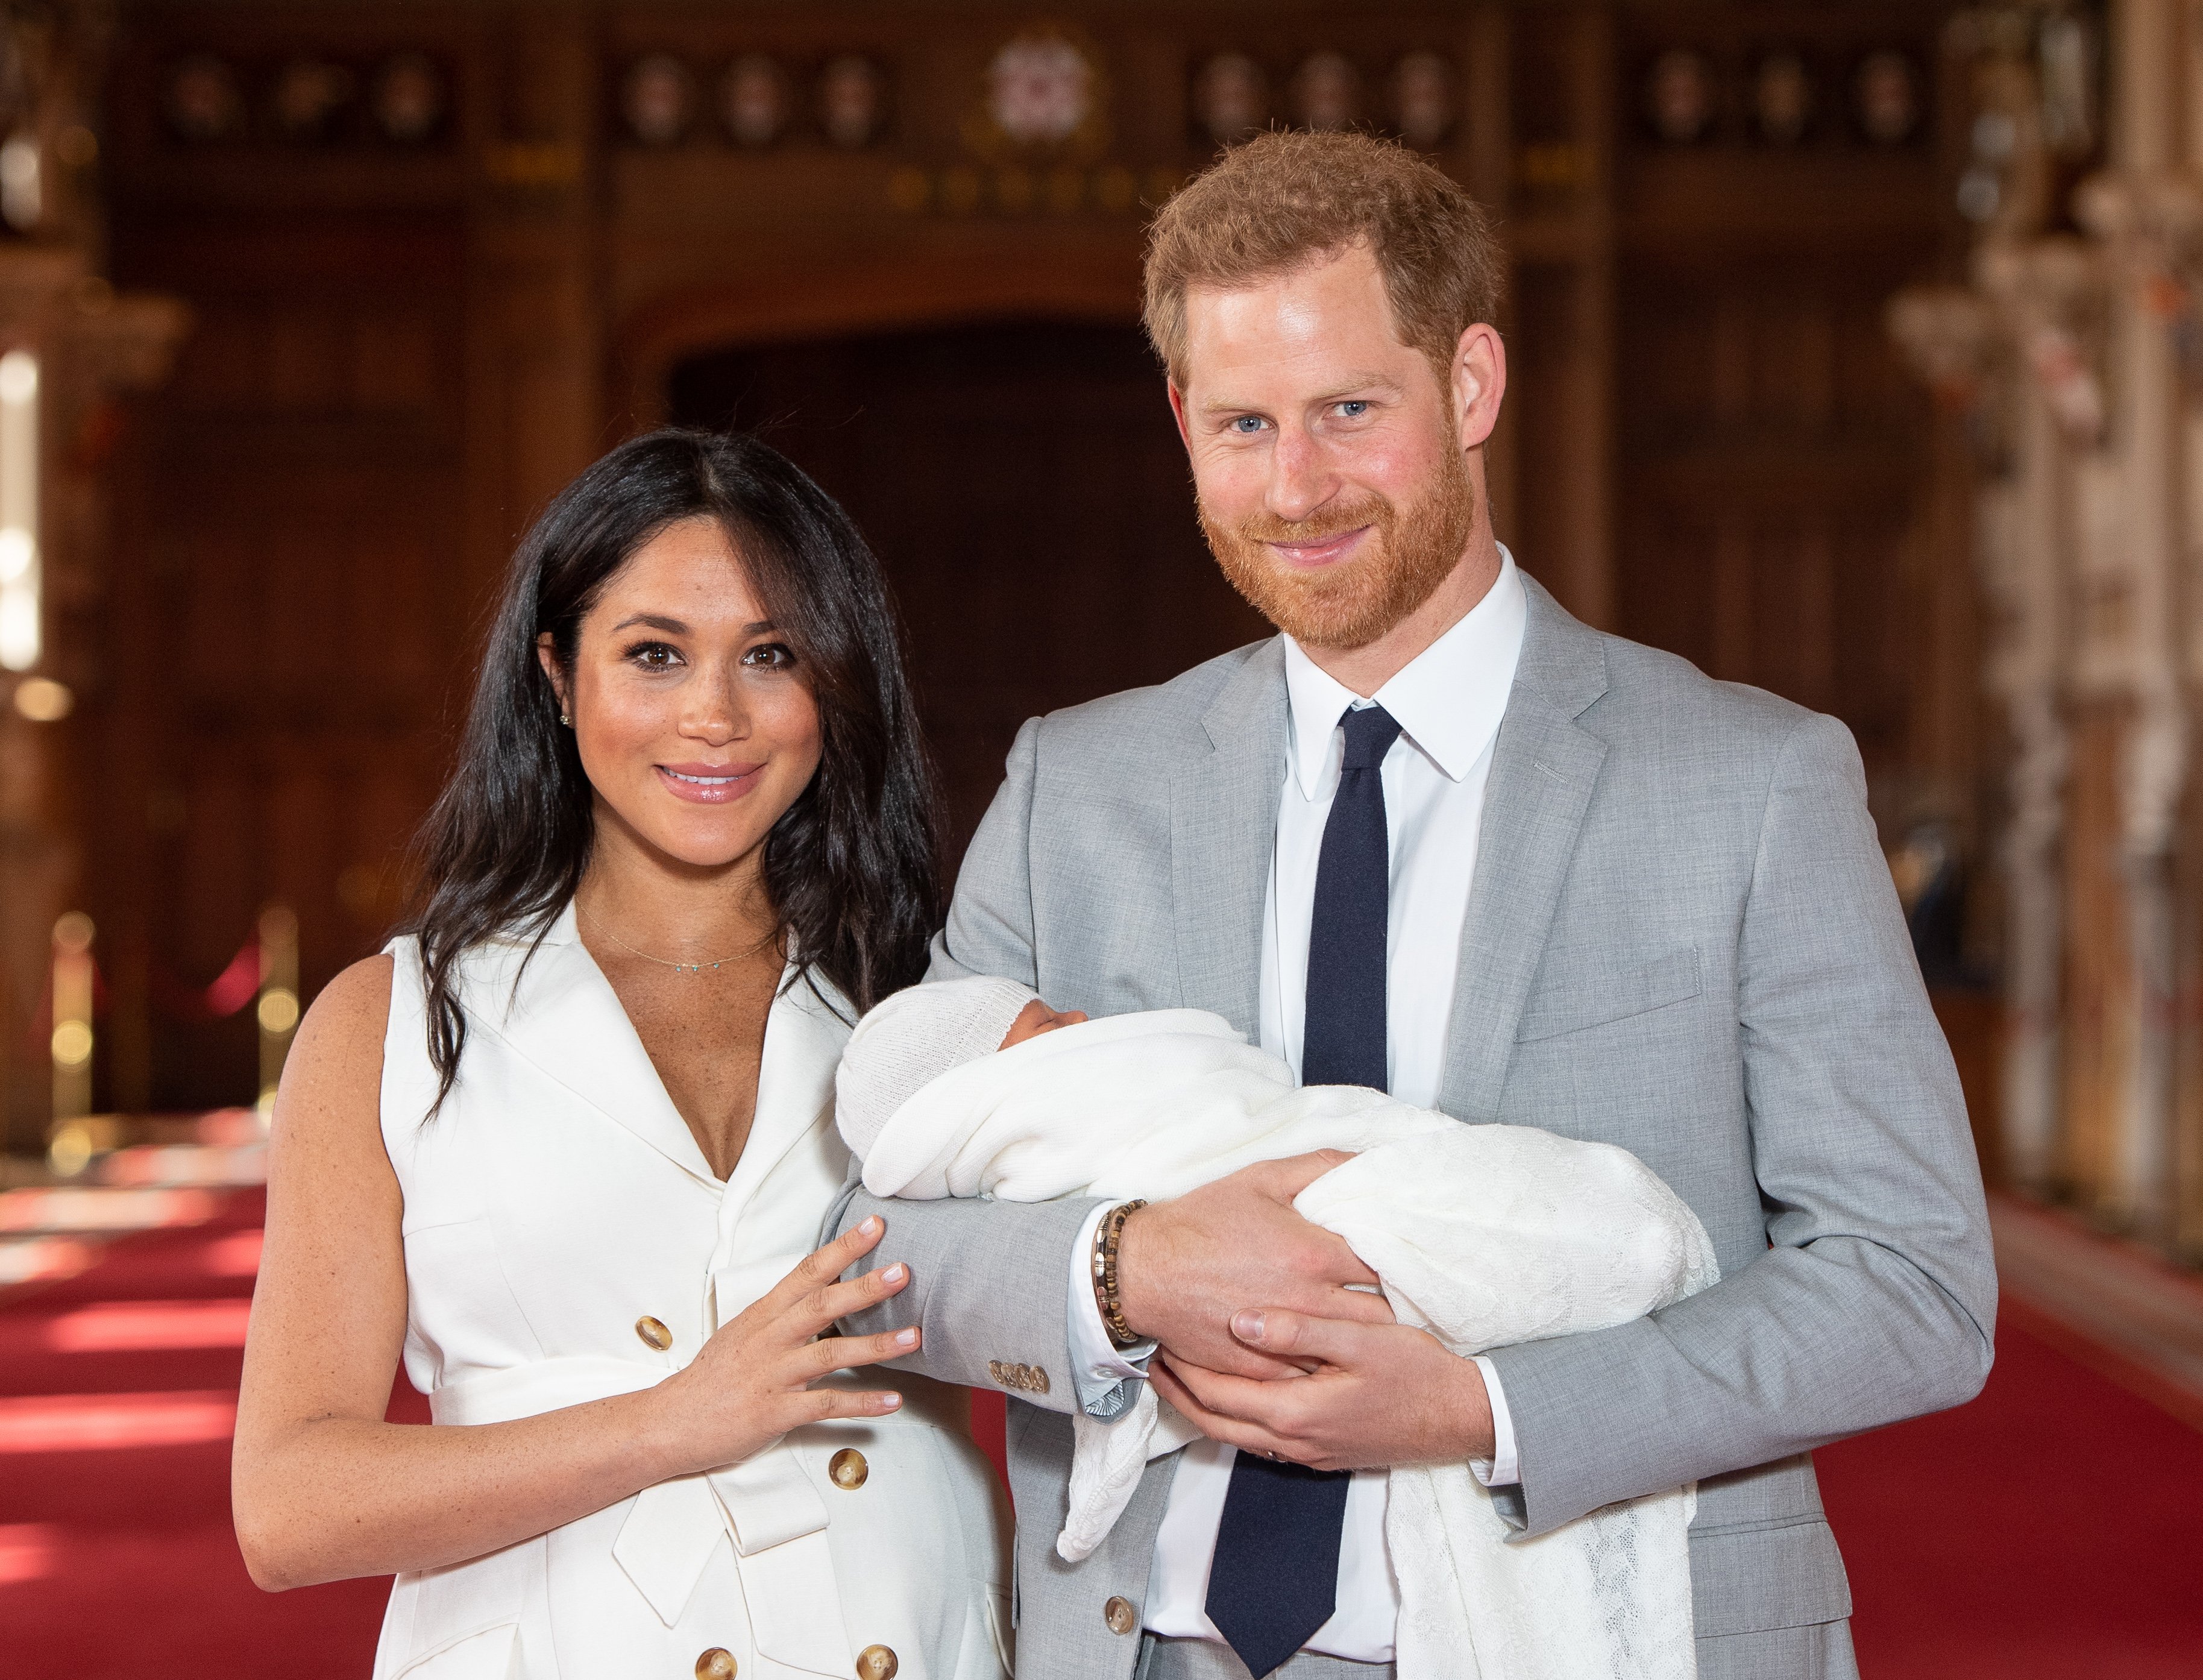 Prince Harry, Duke of Sussex, and Meghan, Duchess of Sussex, pose with their newborn son Archie Harrison Mountbatten-Windsor during a photocall in St George's Hall at Windsor Castle on May 8, 2019, in Windsor, England. | Source: Getty Images